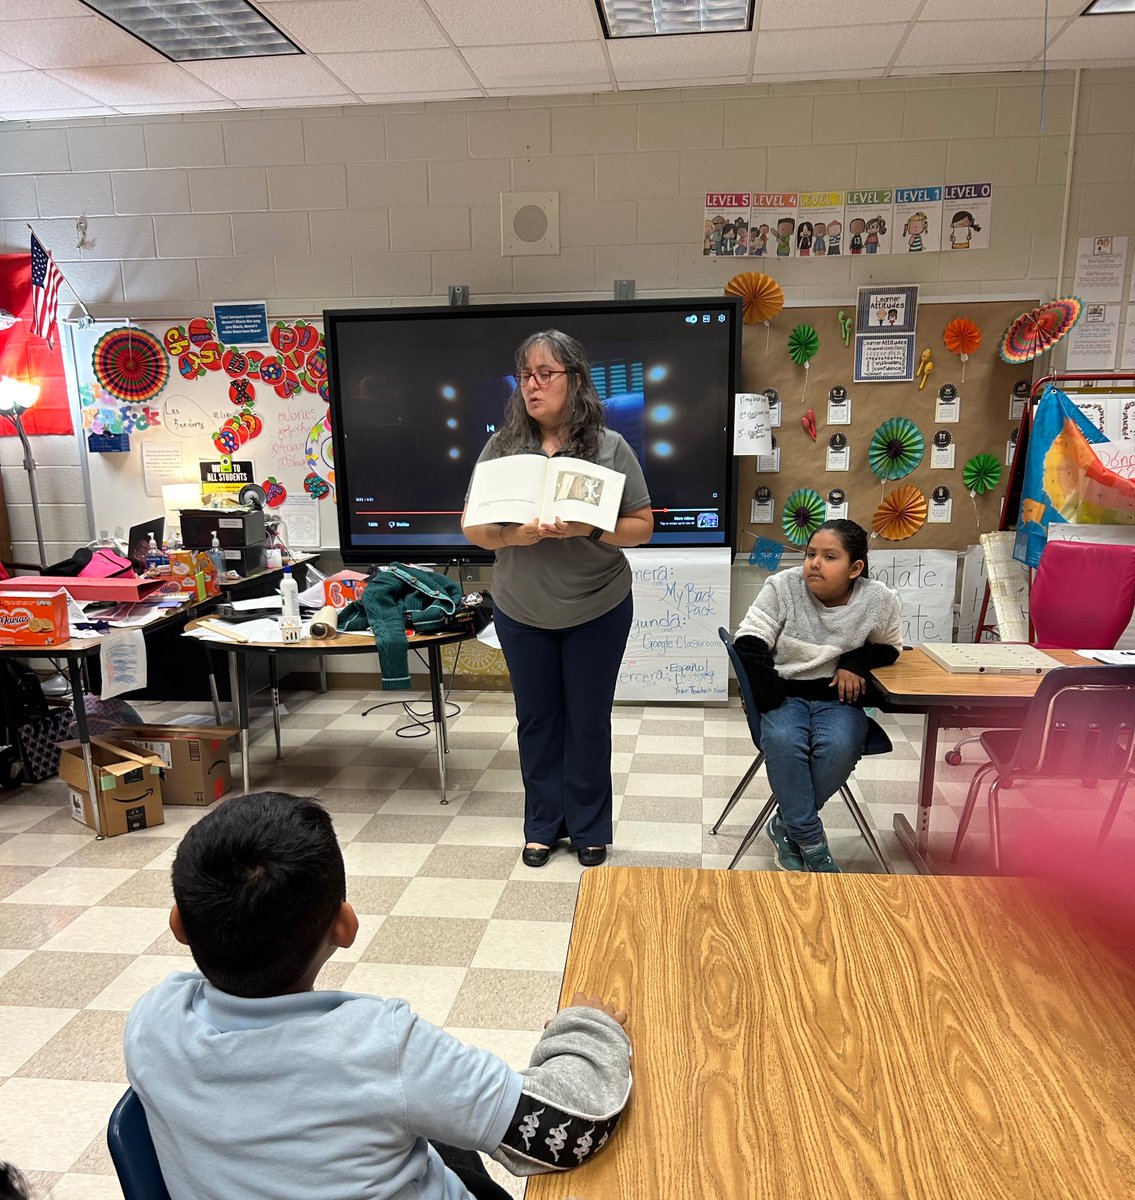 Each year our students participate in the national Read Across America celebration, fostering a love for reading. Students from L.P. Miles Elementary School were treated to special guest storytellers, including Atlanta Public Schools Superintendent Danielle Battle.